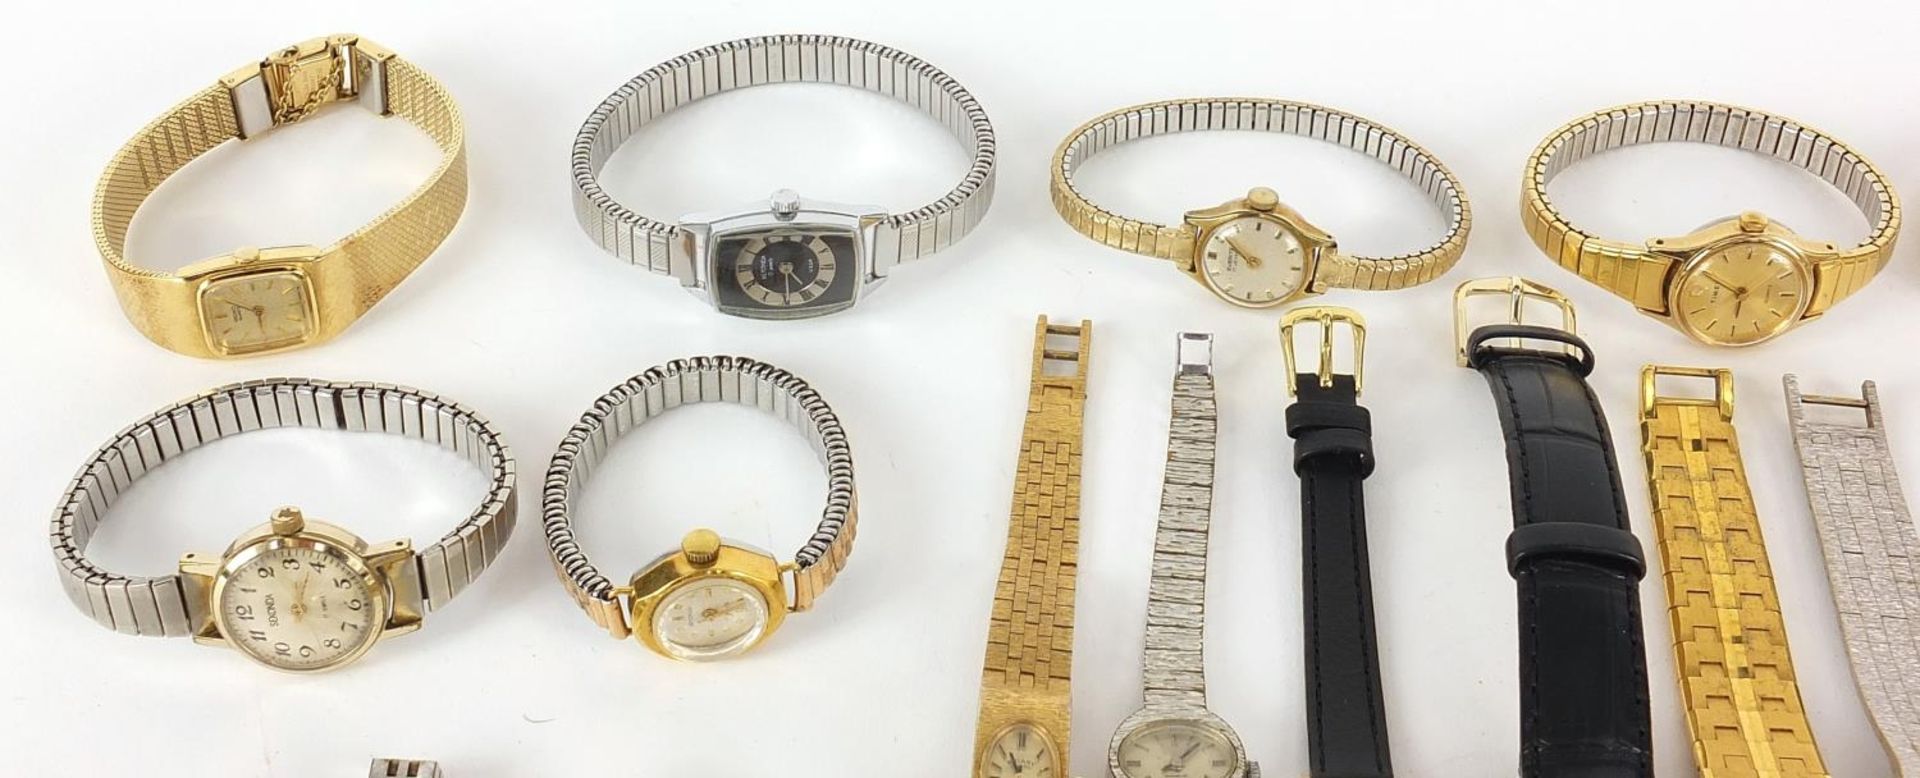 Twenty four ladies watches to include Seiko, Sekonda, Accurist, Timex and Rotary - Image 2 of 6